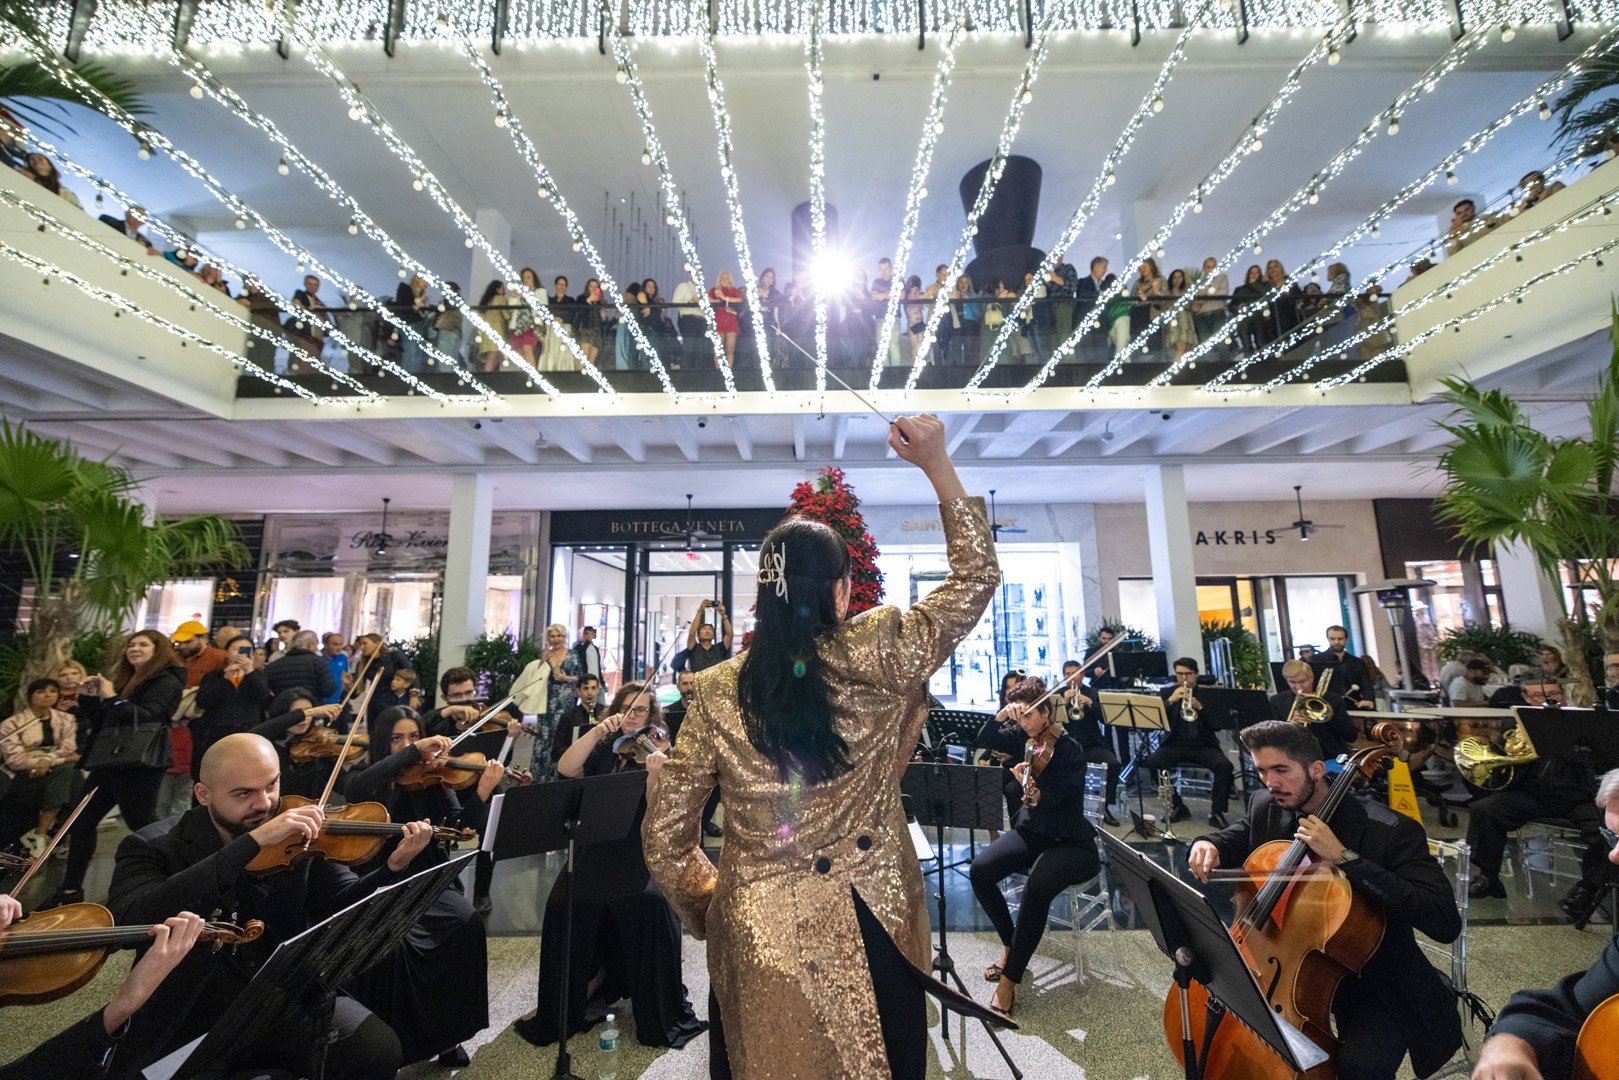 South Florida Symphony Orchestra performing in the Bal Harbour Shops center courtyard